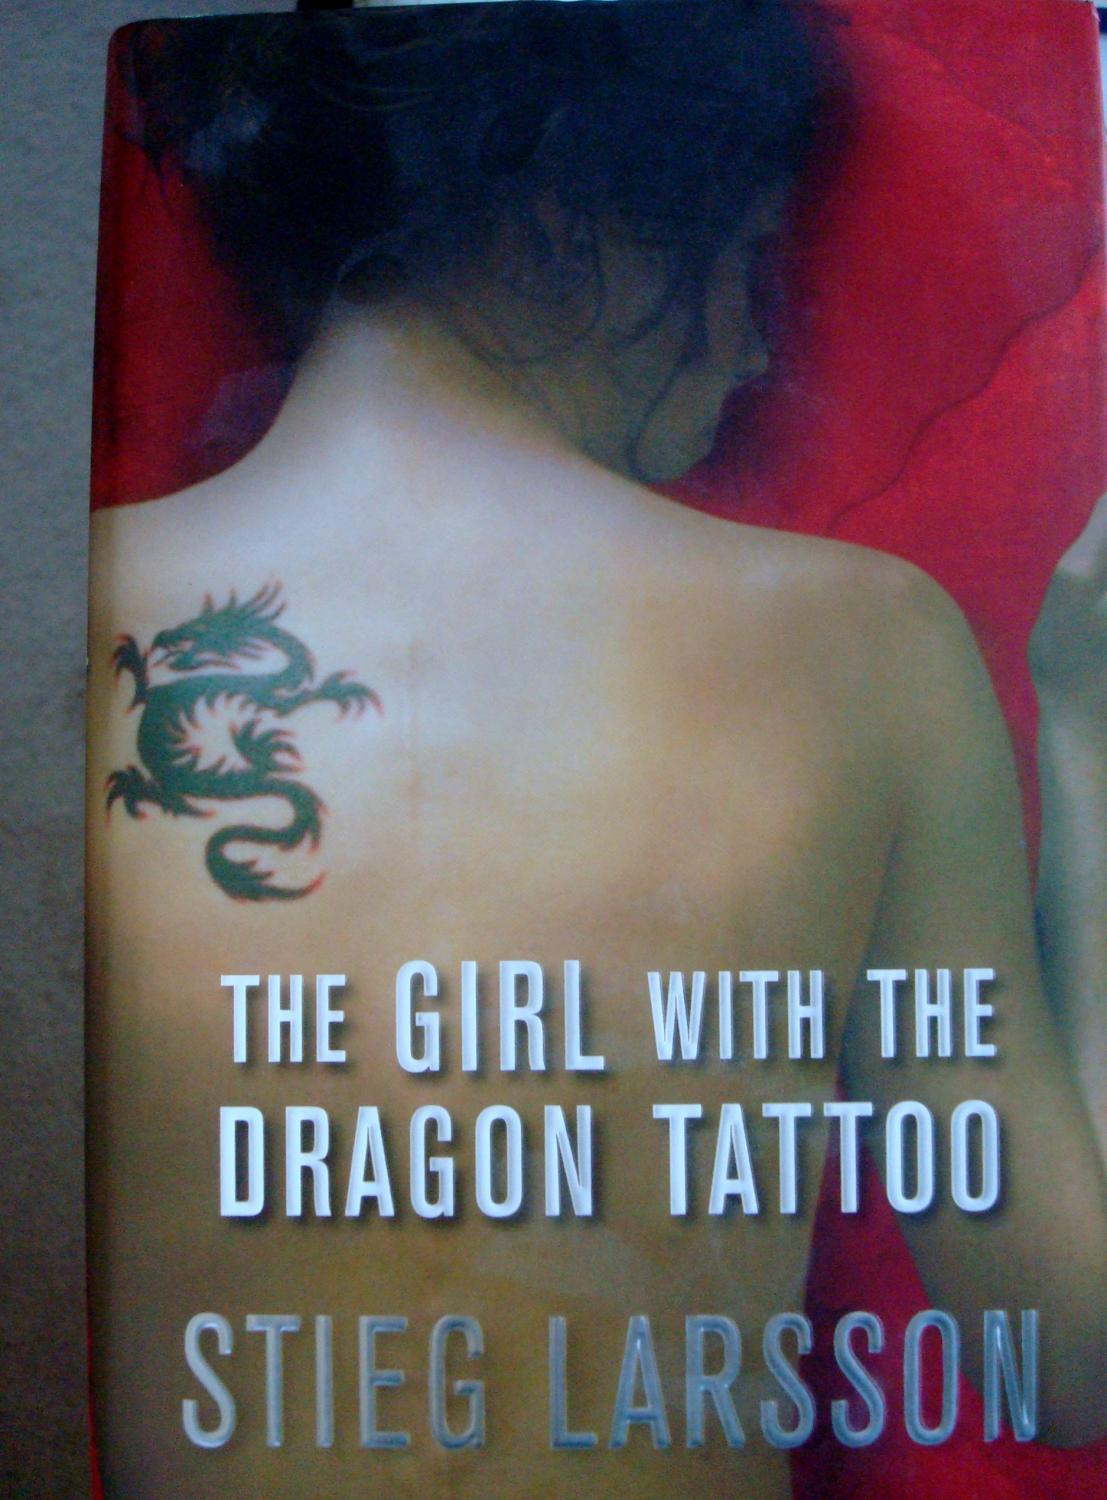 STIEG LARSSON'S THE GIRL WITH THE DRAGON TATTOO BOOK 2 | DC